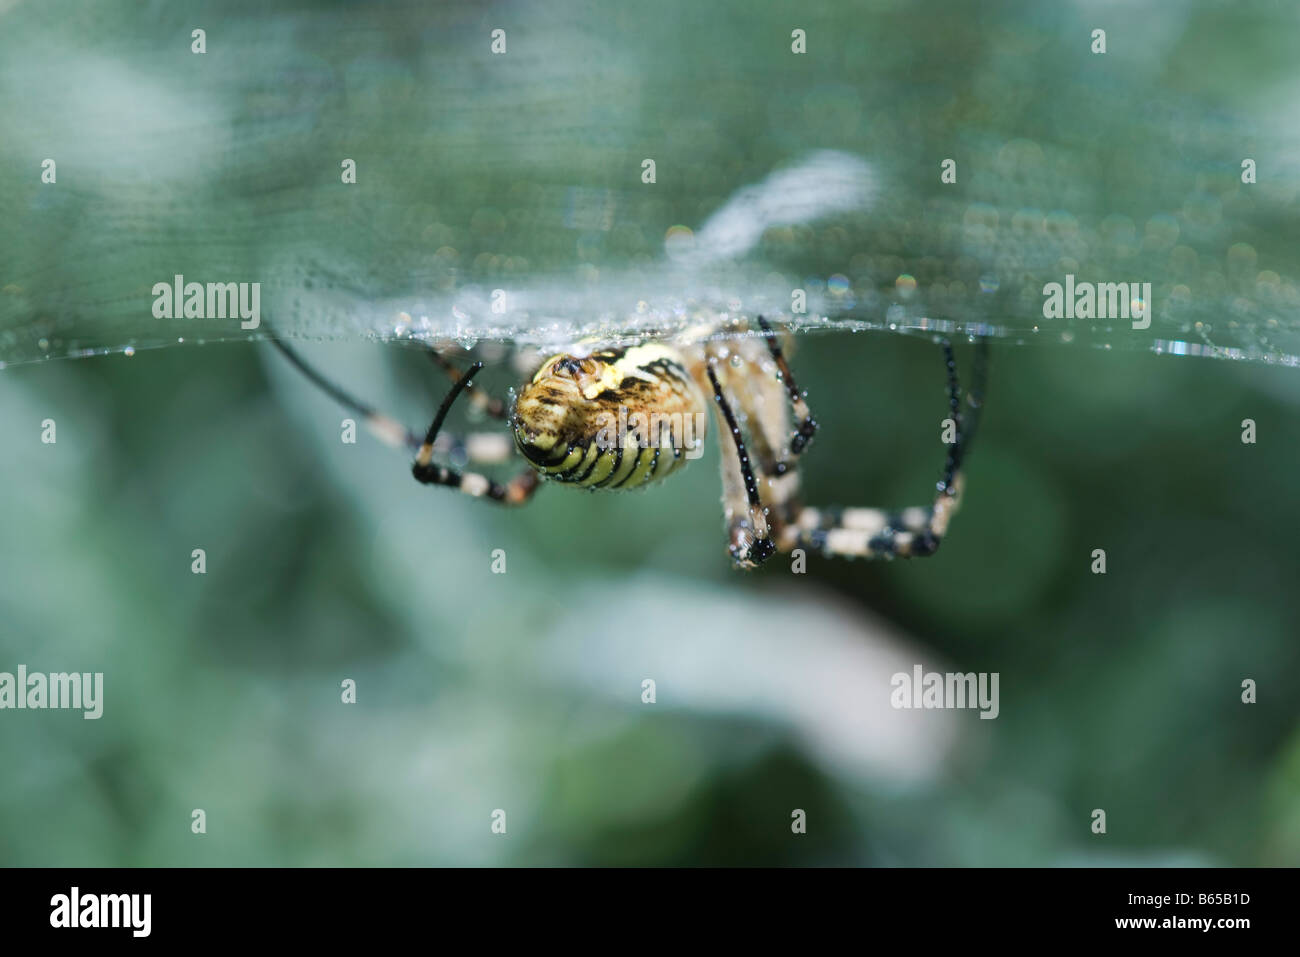 Yellow Garden Spider (argiope aurantia), low angle view Stock Photo